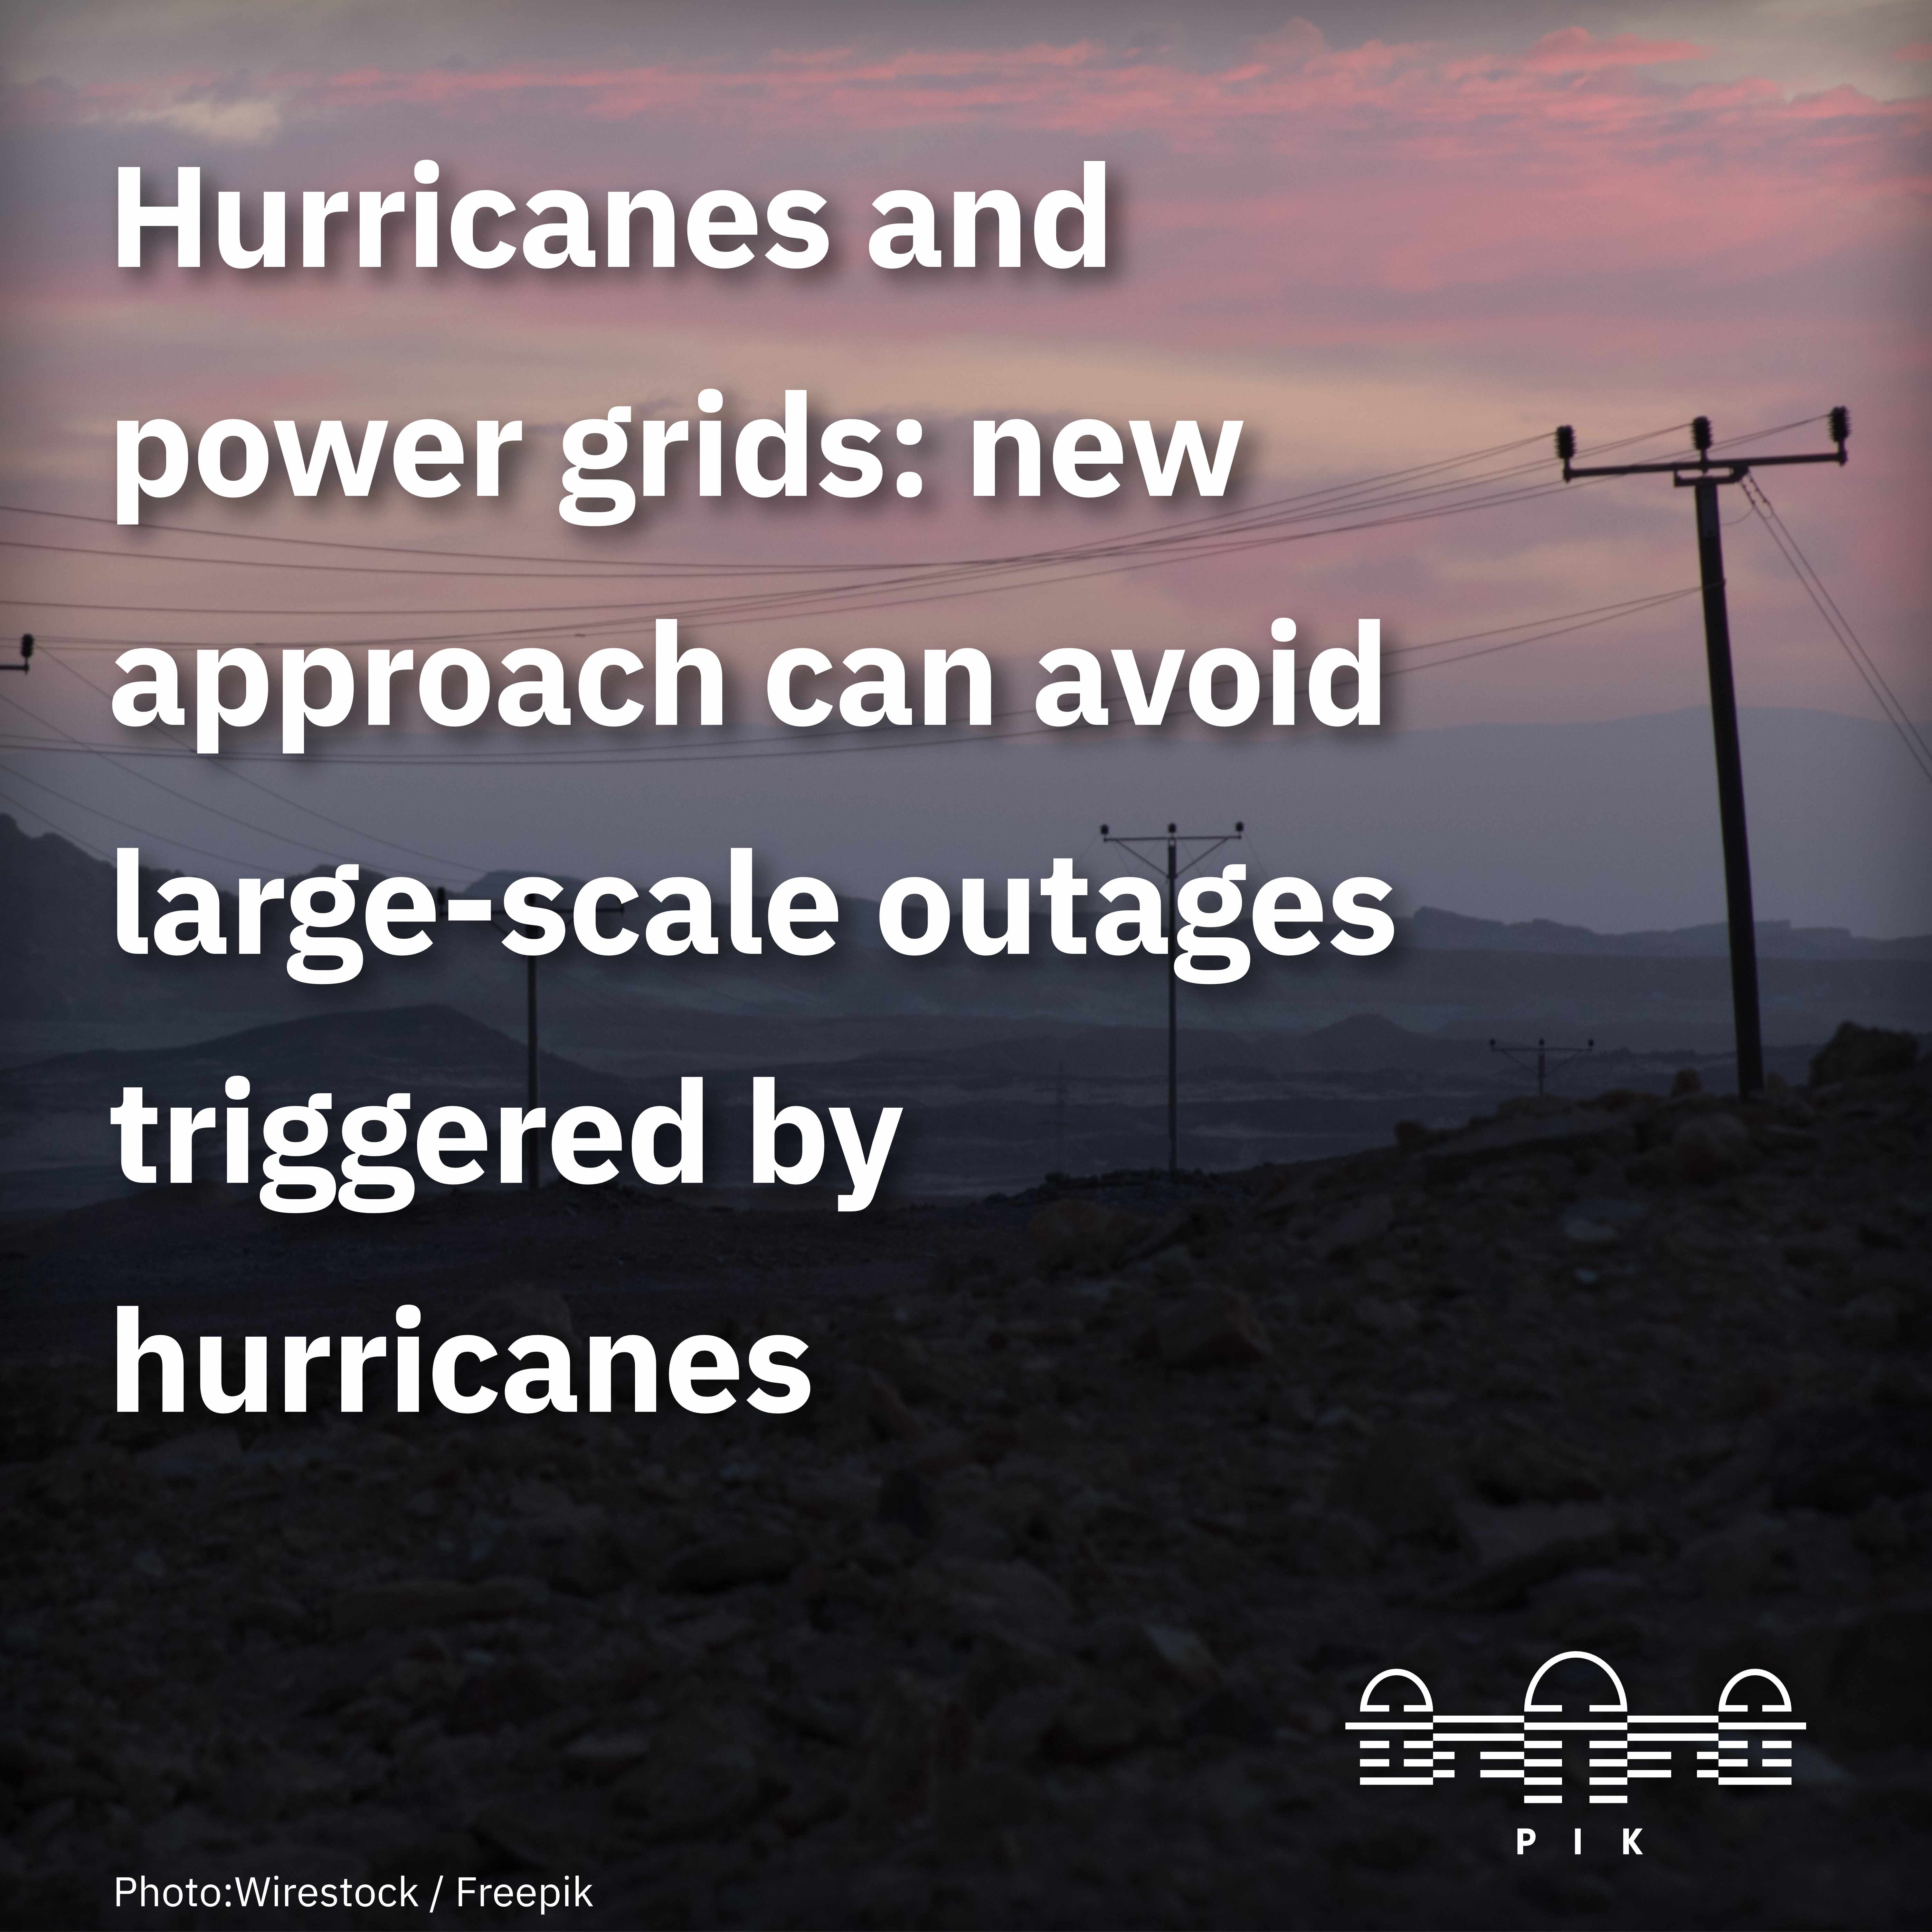 Hurricanes and power grids